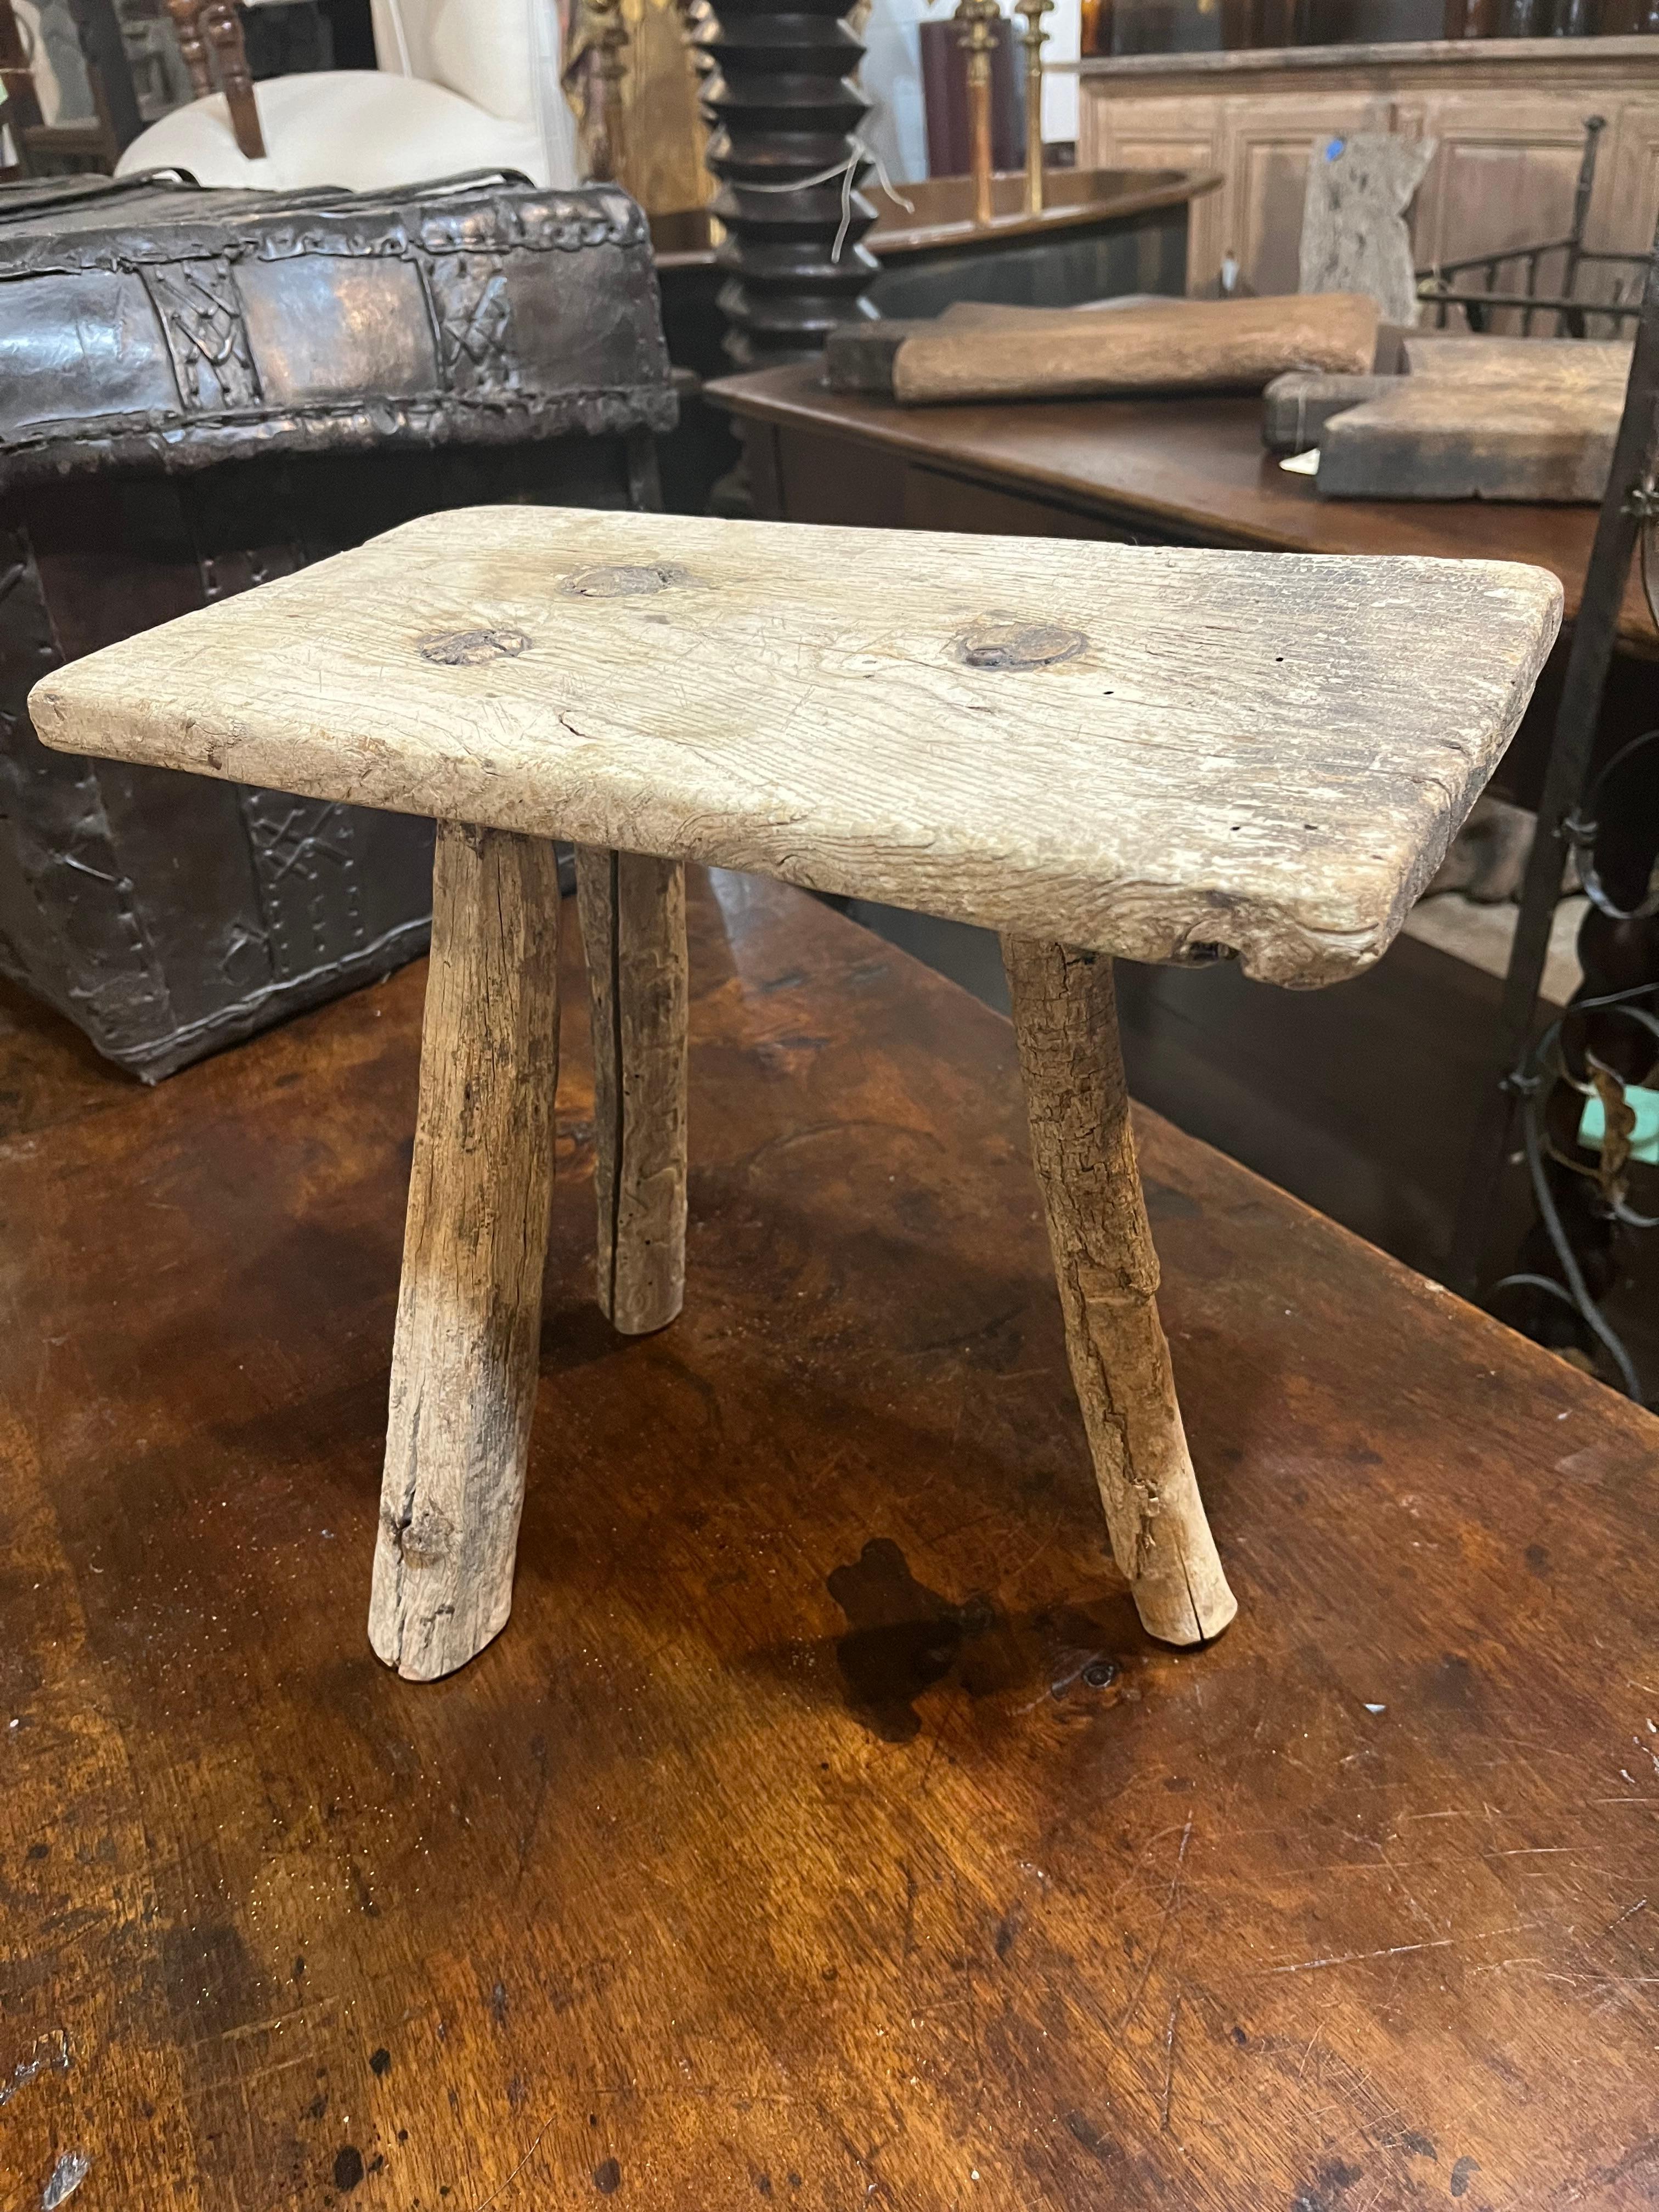 A very charming 19th century rustic Milking Stool from Spain in beautifully patina'd pine.  A wonderful accent piece.